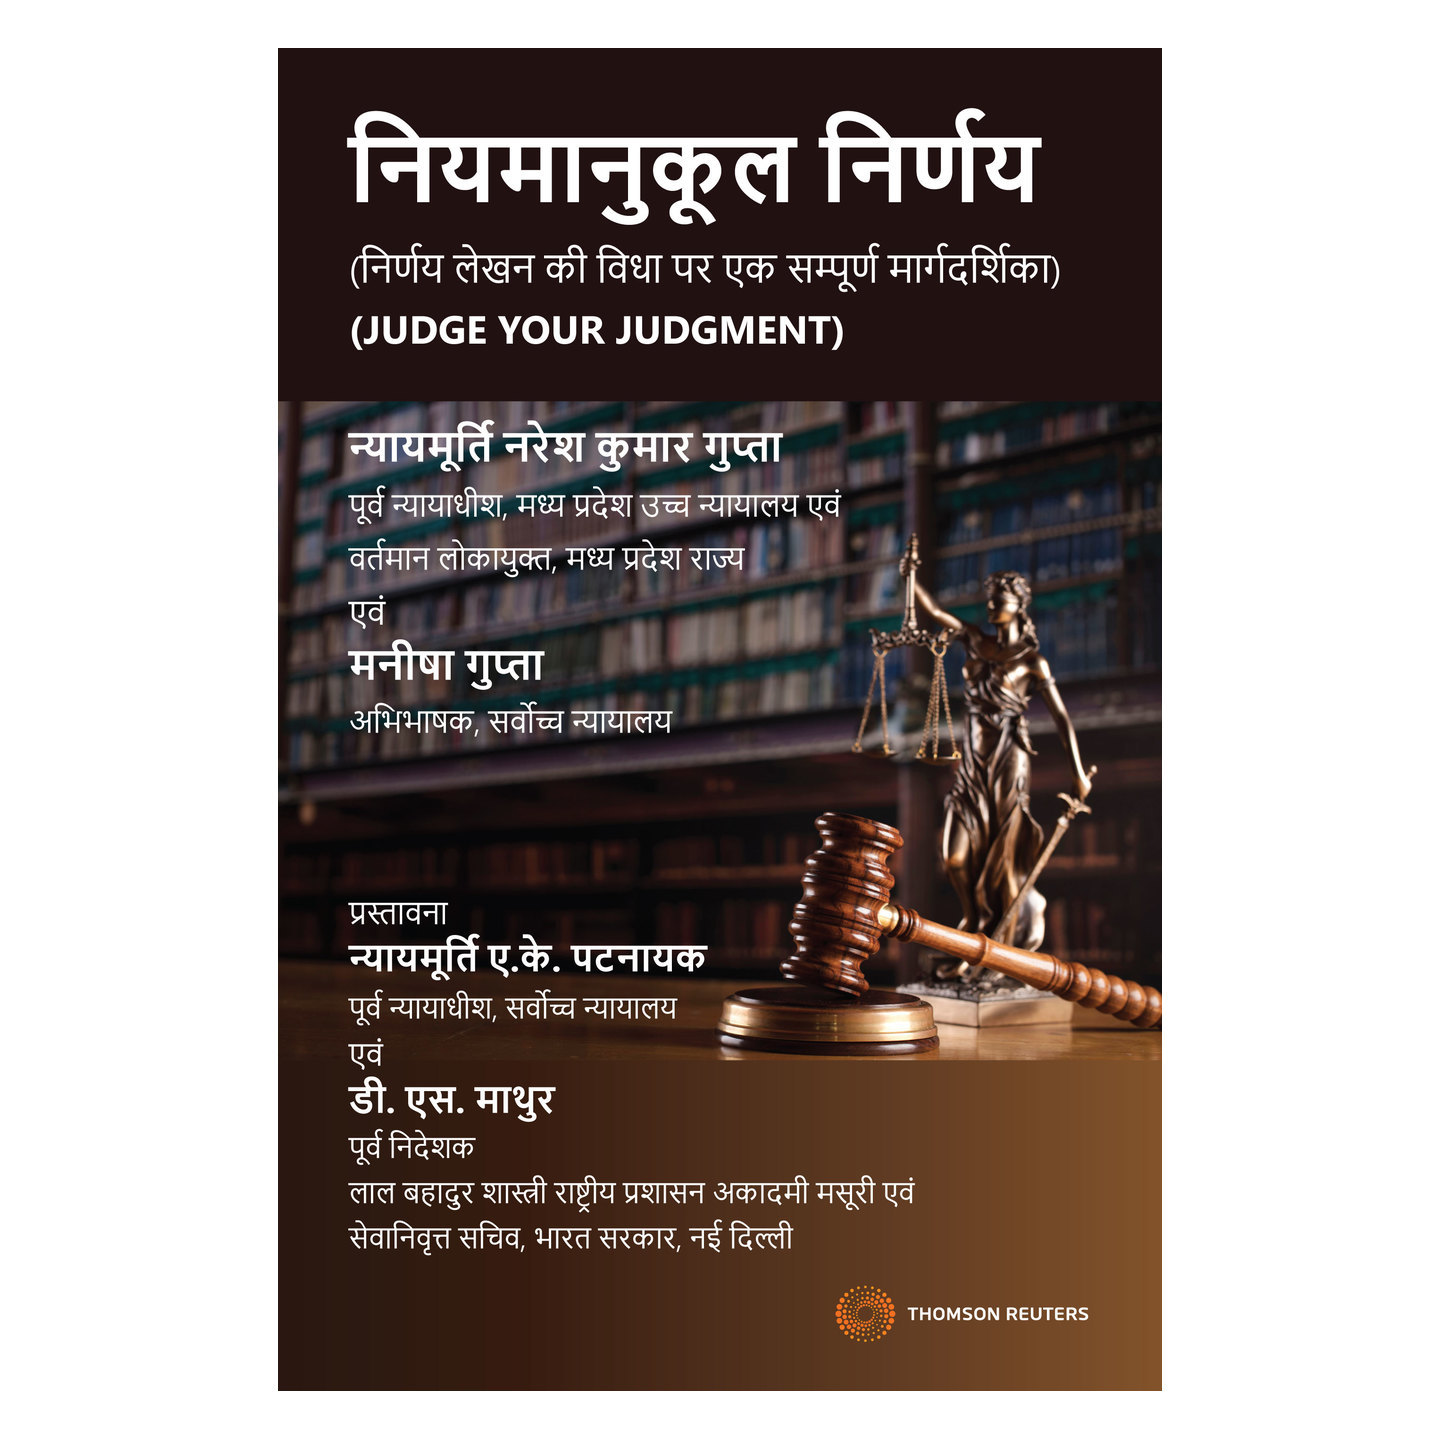 Judge Your Judgment (A Book on Drafting of Judgments and Orders) Hindi Edition